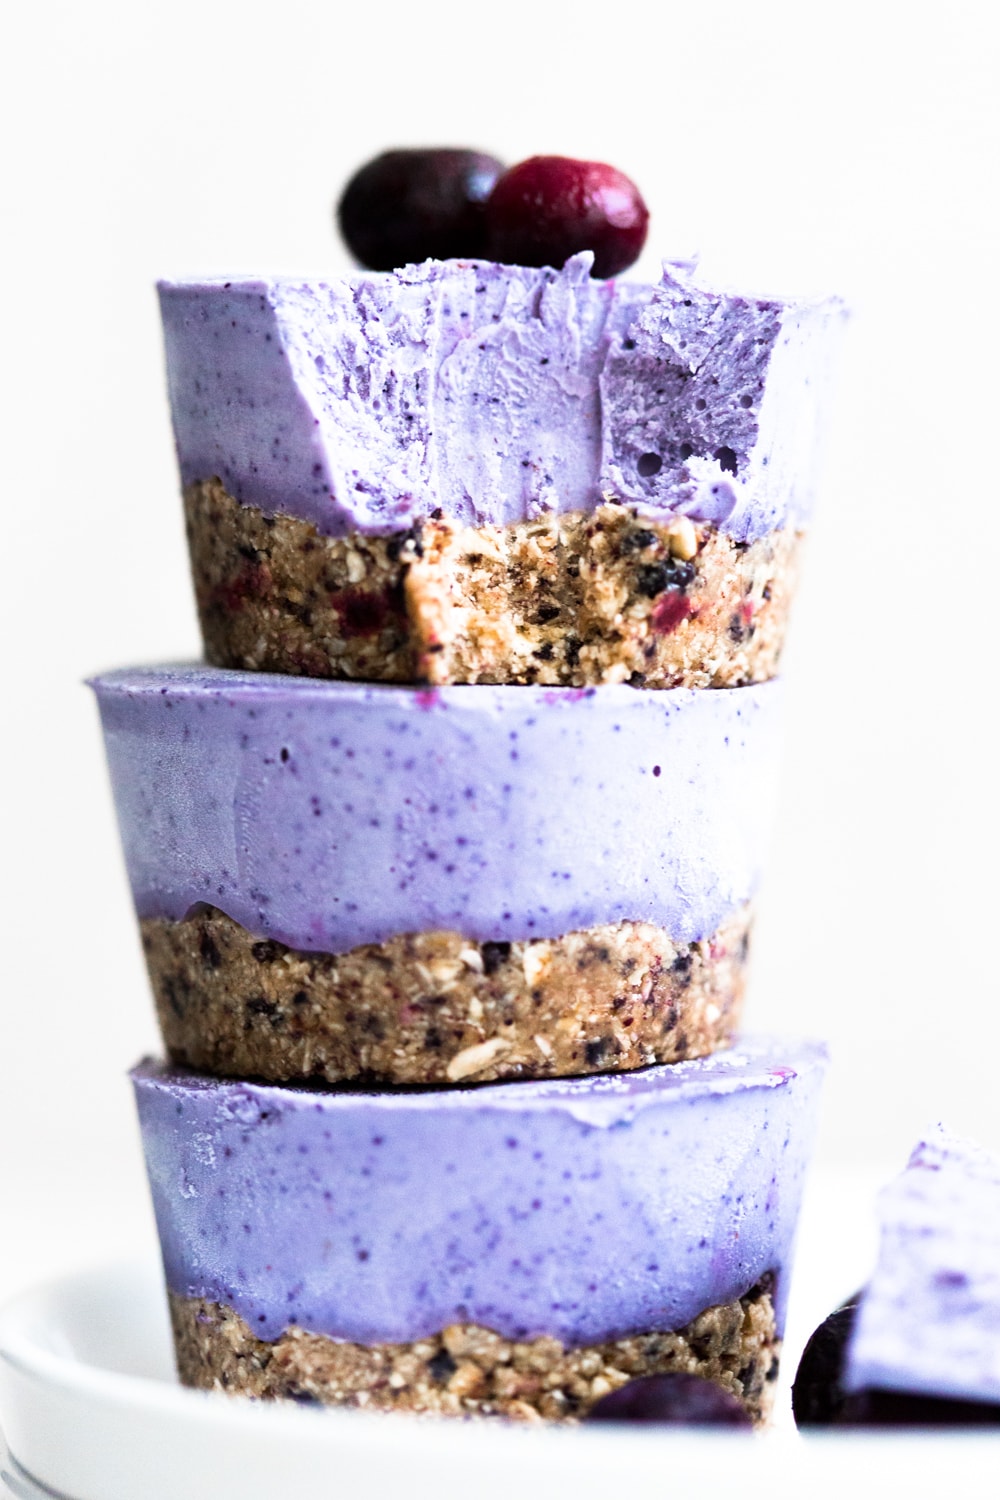 Delicious Raw Vegan Blueberry Cheesecake Bites with a fruity Oatmeal Crust. Refined Sugar Free and takes only 20 minutes to prepare. #vegan #cheesecake #raw #blueberrycheesecake #nobake #healthy #simple #icecream #cashews #veganrecipes #healthyvegan #natural #refinedsugarfree #healthydesserts #healthydessertrecipes